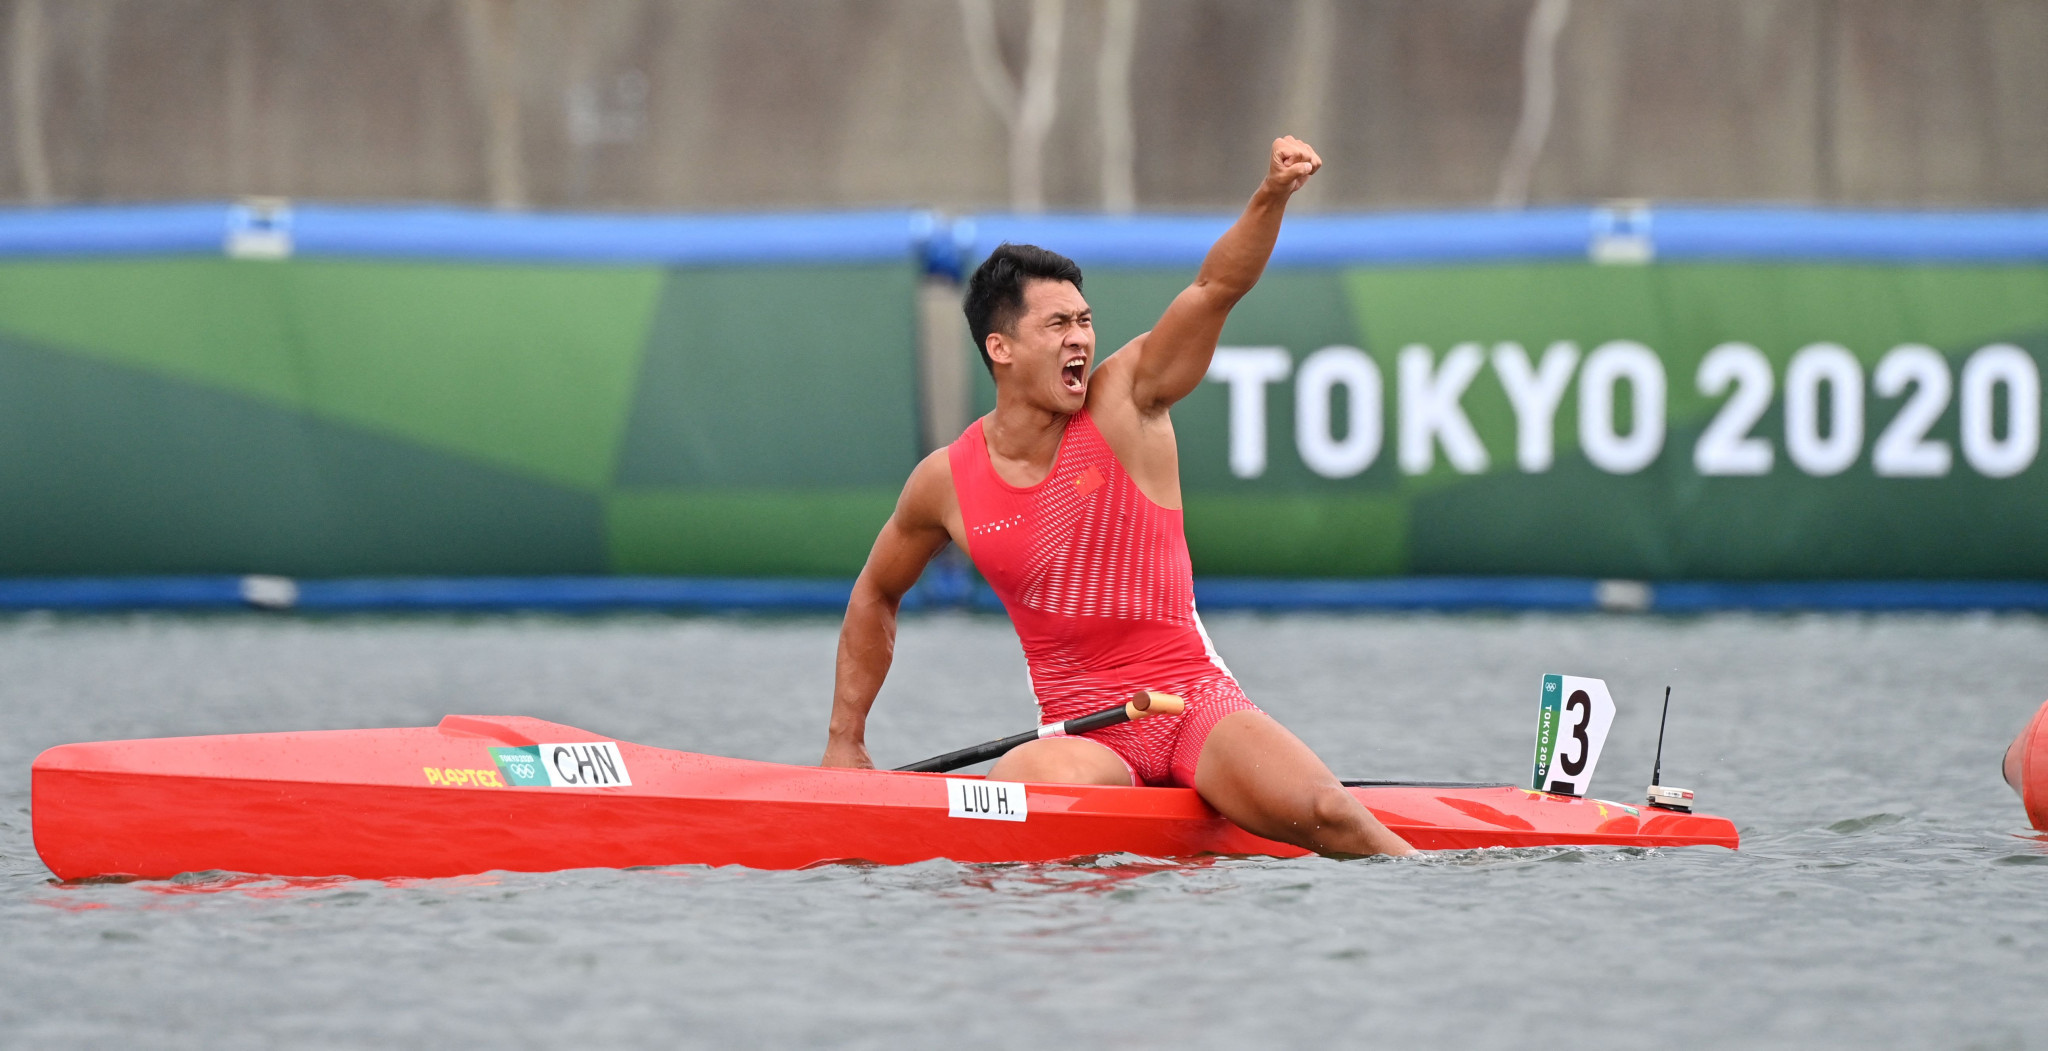 China's Liu Hao won the silver medal in the men's canoe single 1000 metres final during the Tokyo 2020 Olympic Games ©Getty Images